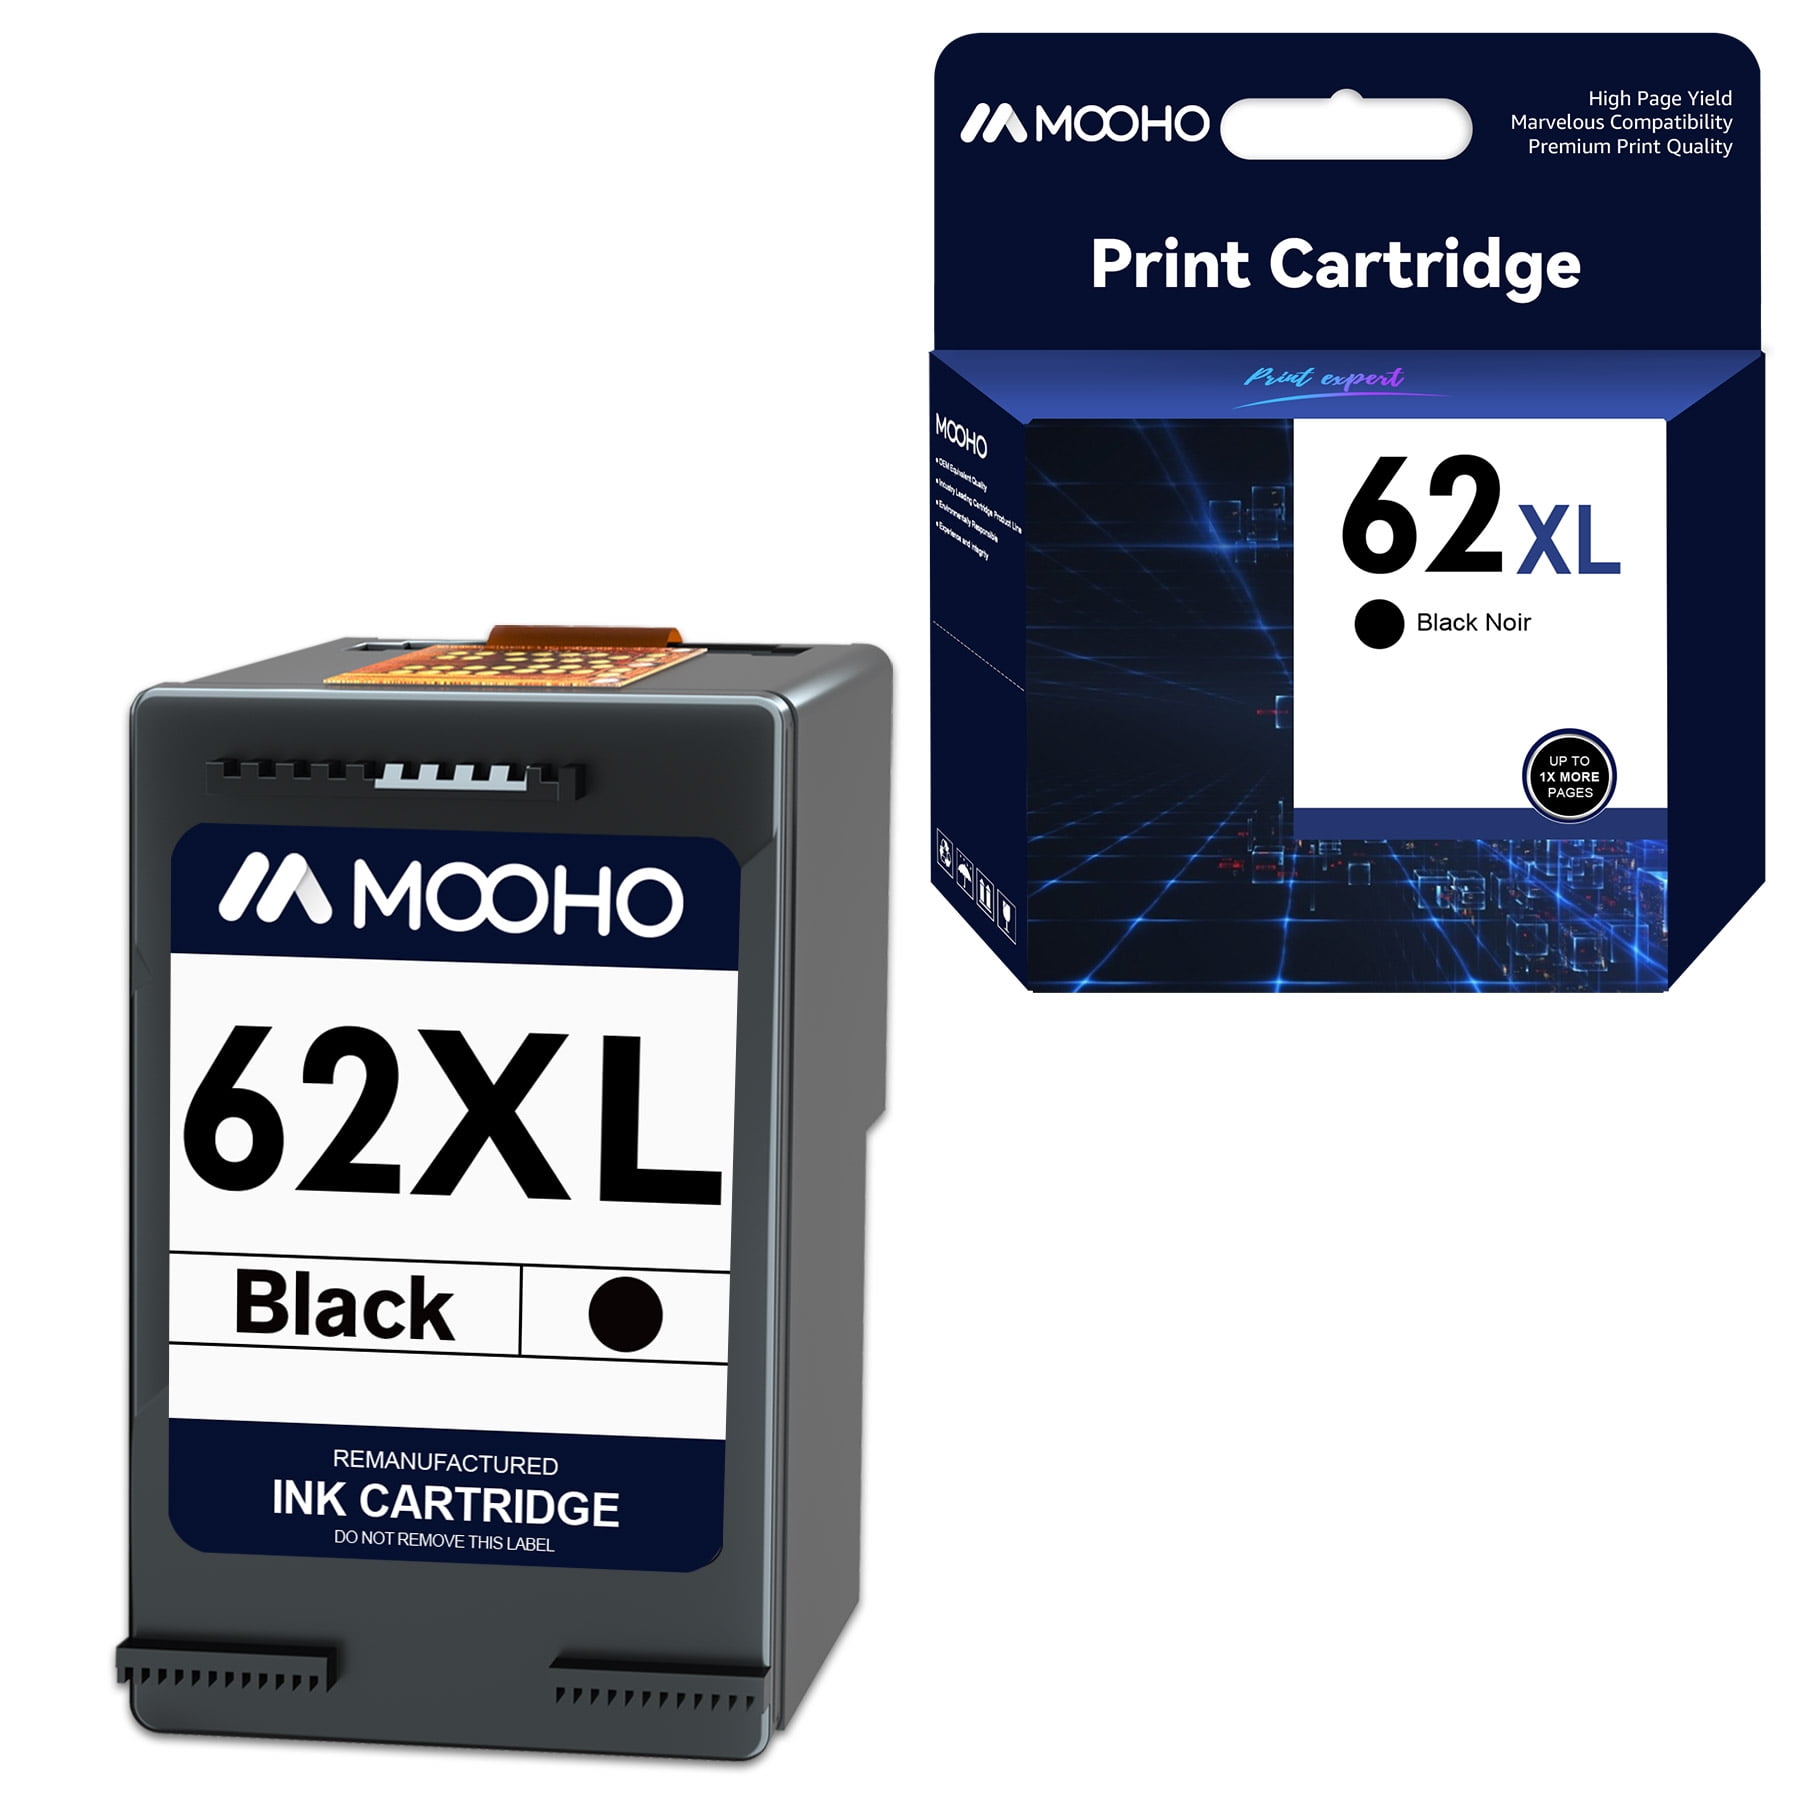 HP 62XL Black High-yield Ink | Works with HP ENVY 5540, 5640, 5660, 7640  Series, HP OfficeJet 5740, 8040 Series, HP OfficeJet Mobile 200, 250 Series  